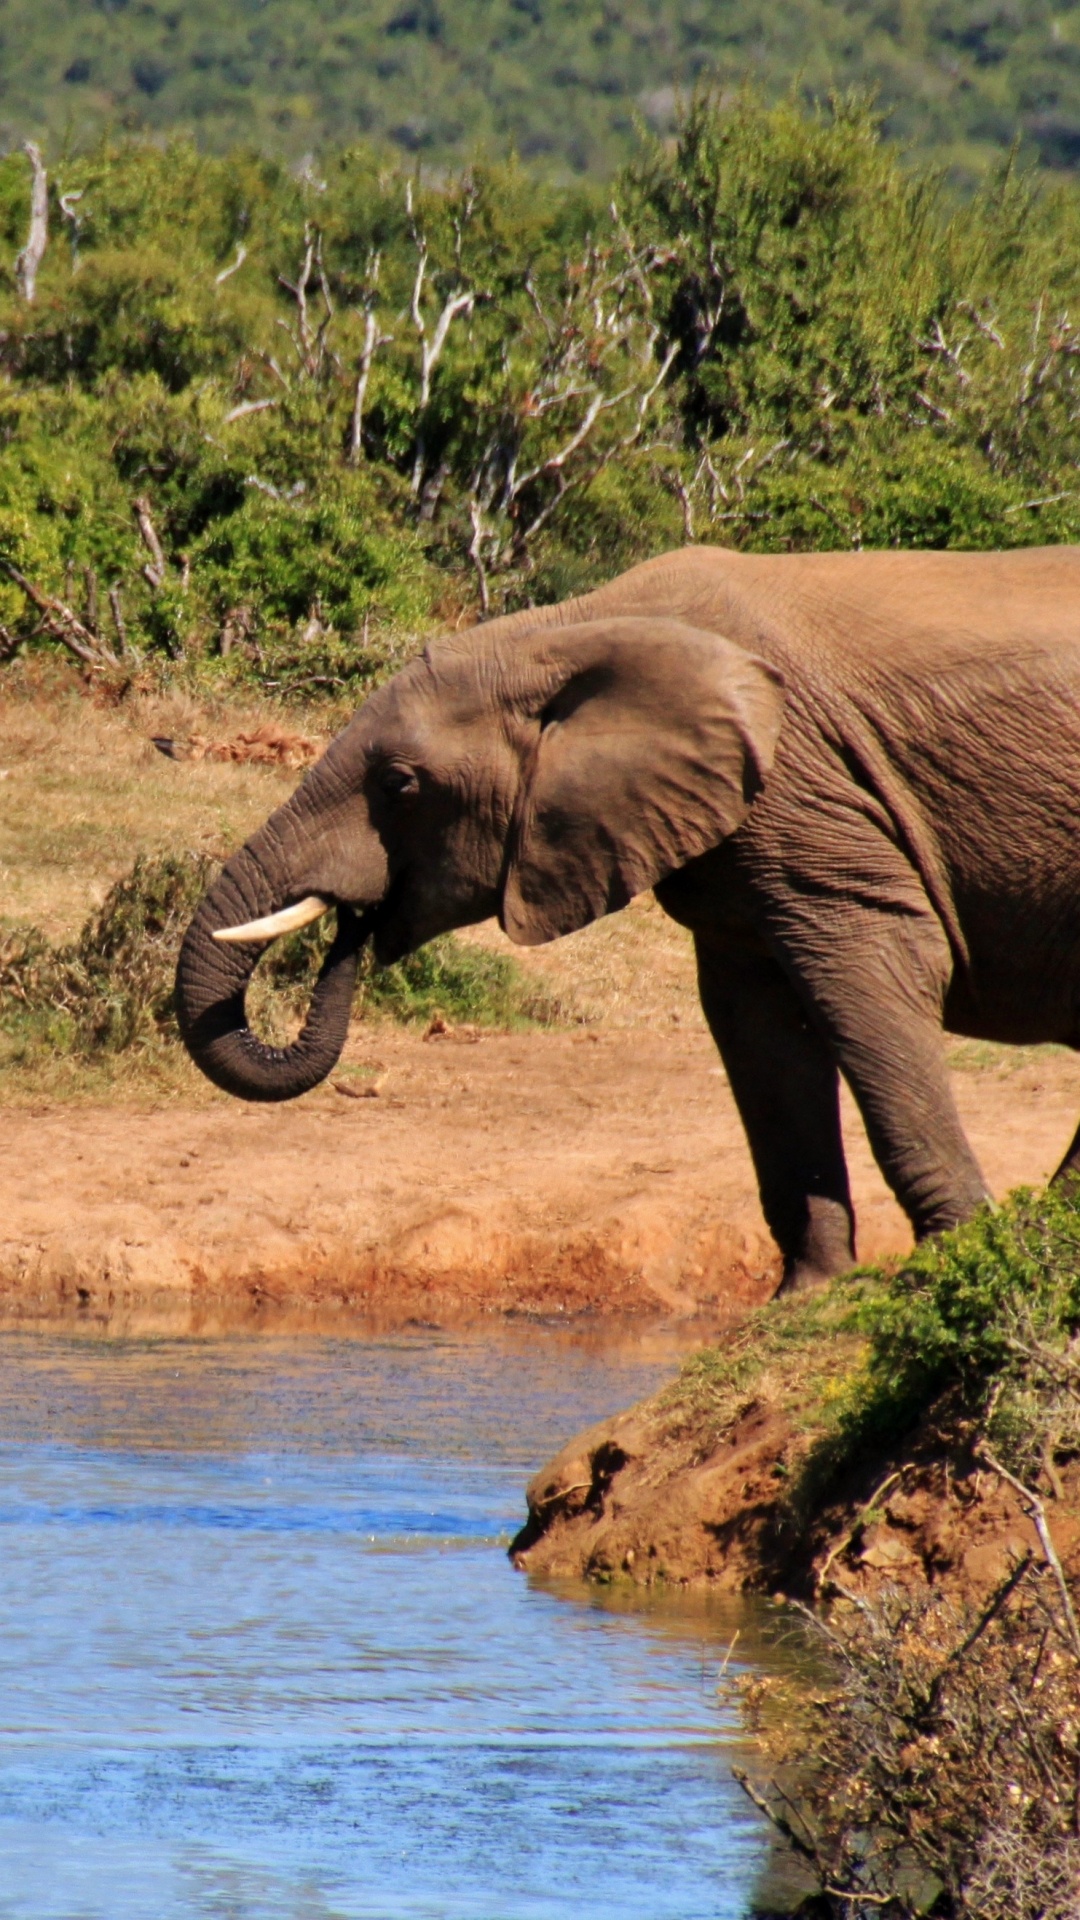 Elephant Drinking Water on River During Daytime. Wallpaper in 1080x1920 Resolution